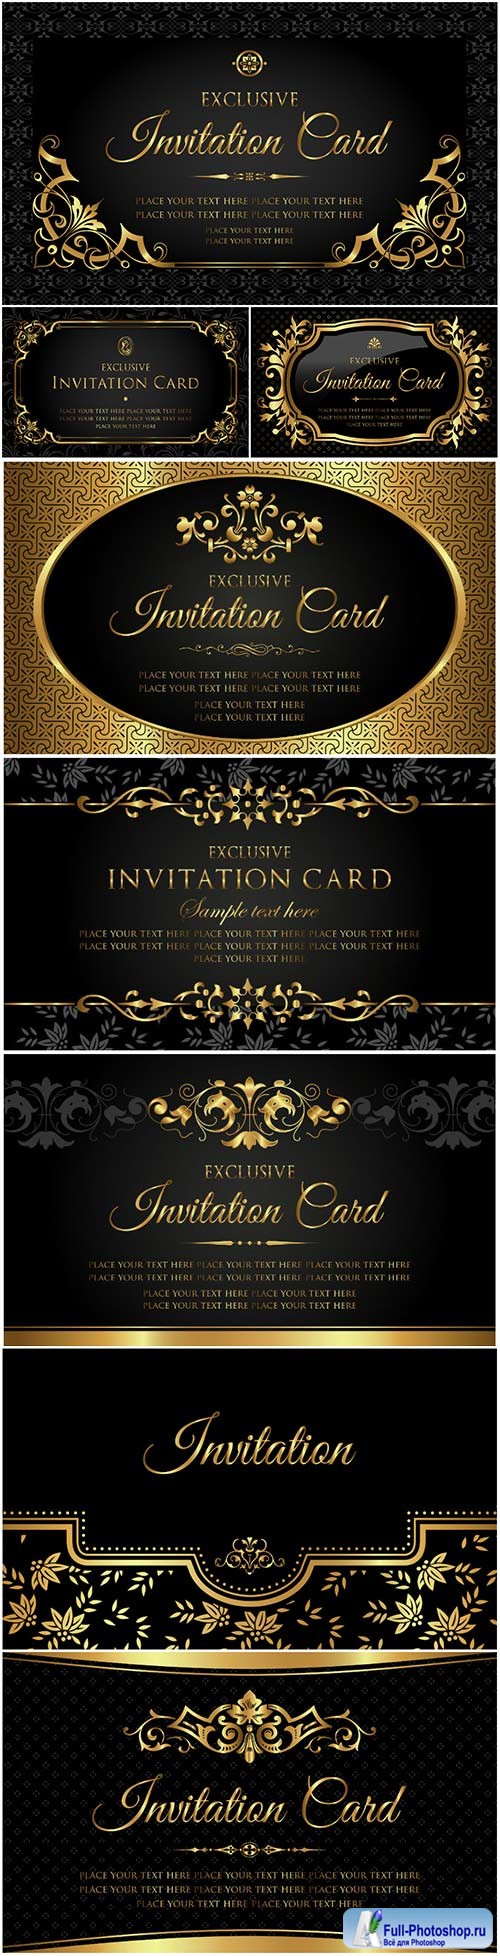 Invitation luxury vector card, black and gold vintage style